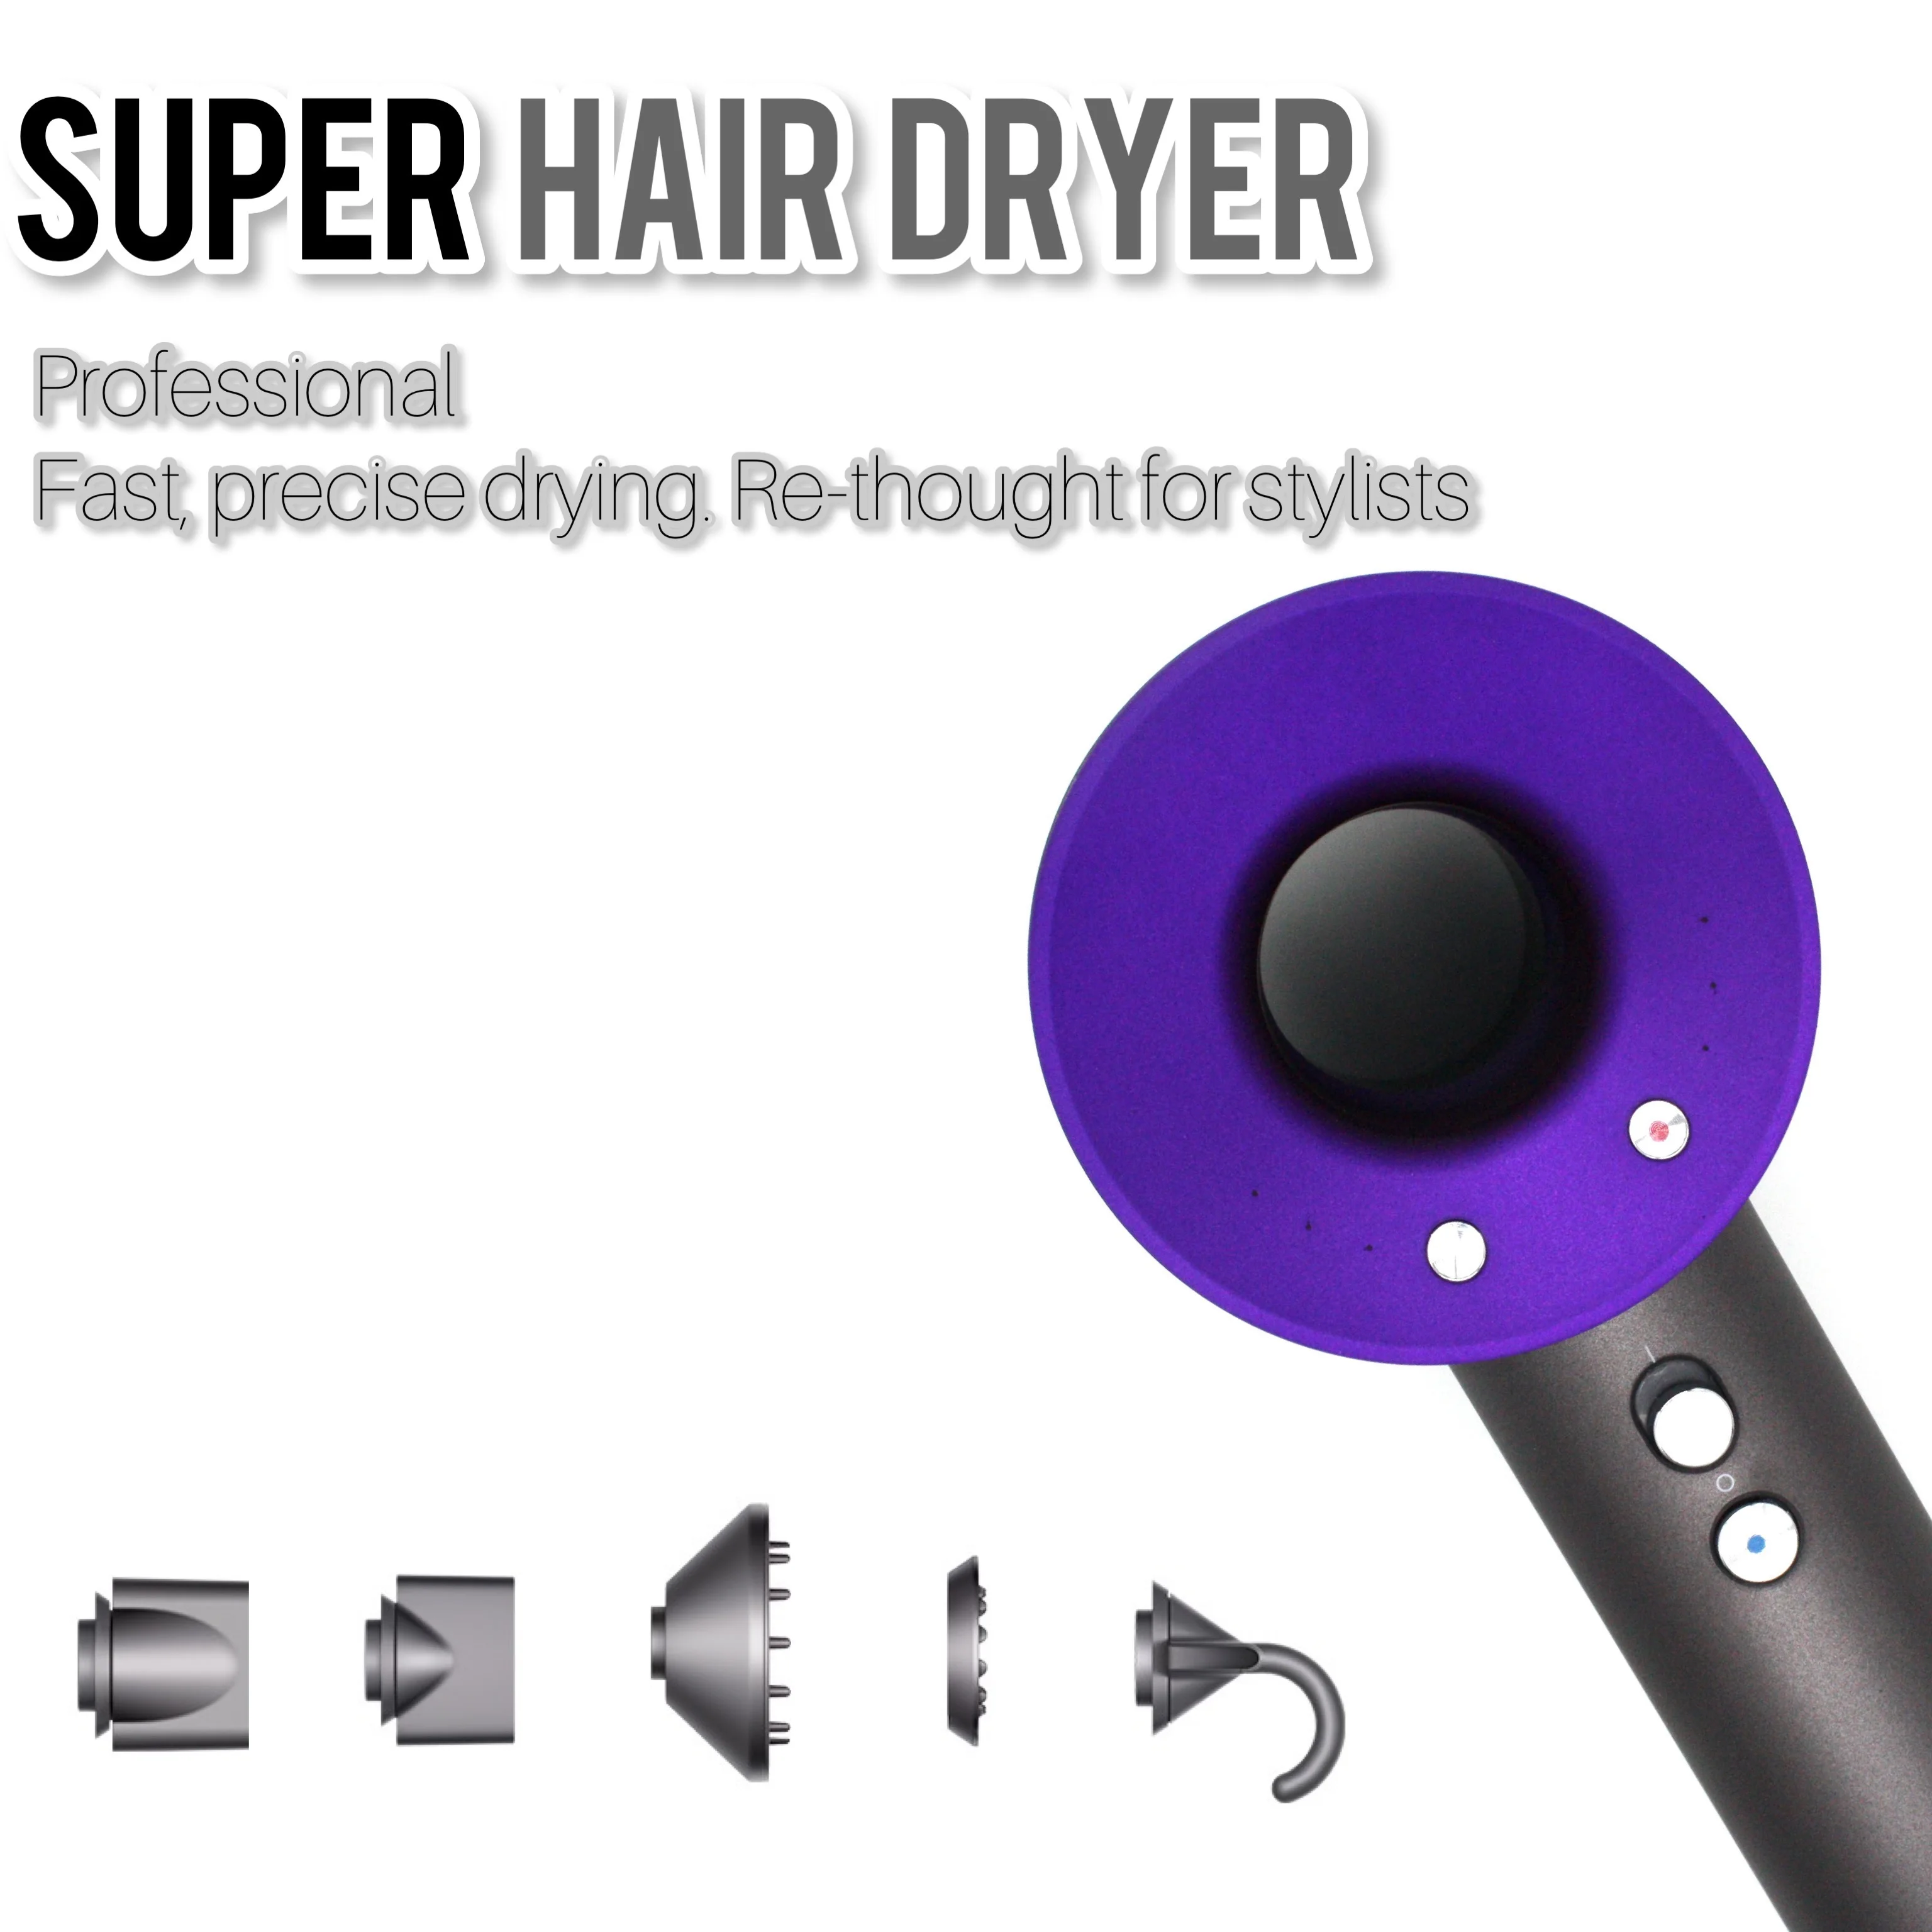 Professional New Hair Dryer With Flyaway Attachment Negative Ionic Premium HD08 Hair Dryers Multifunction Salon Style Tool enlarge